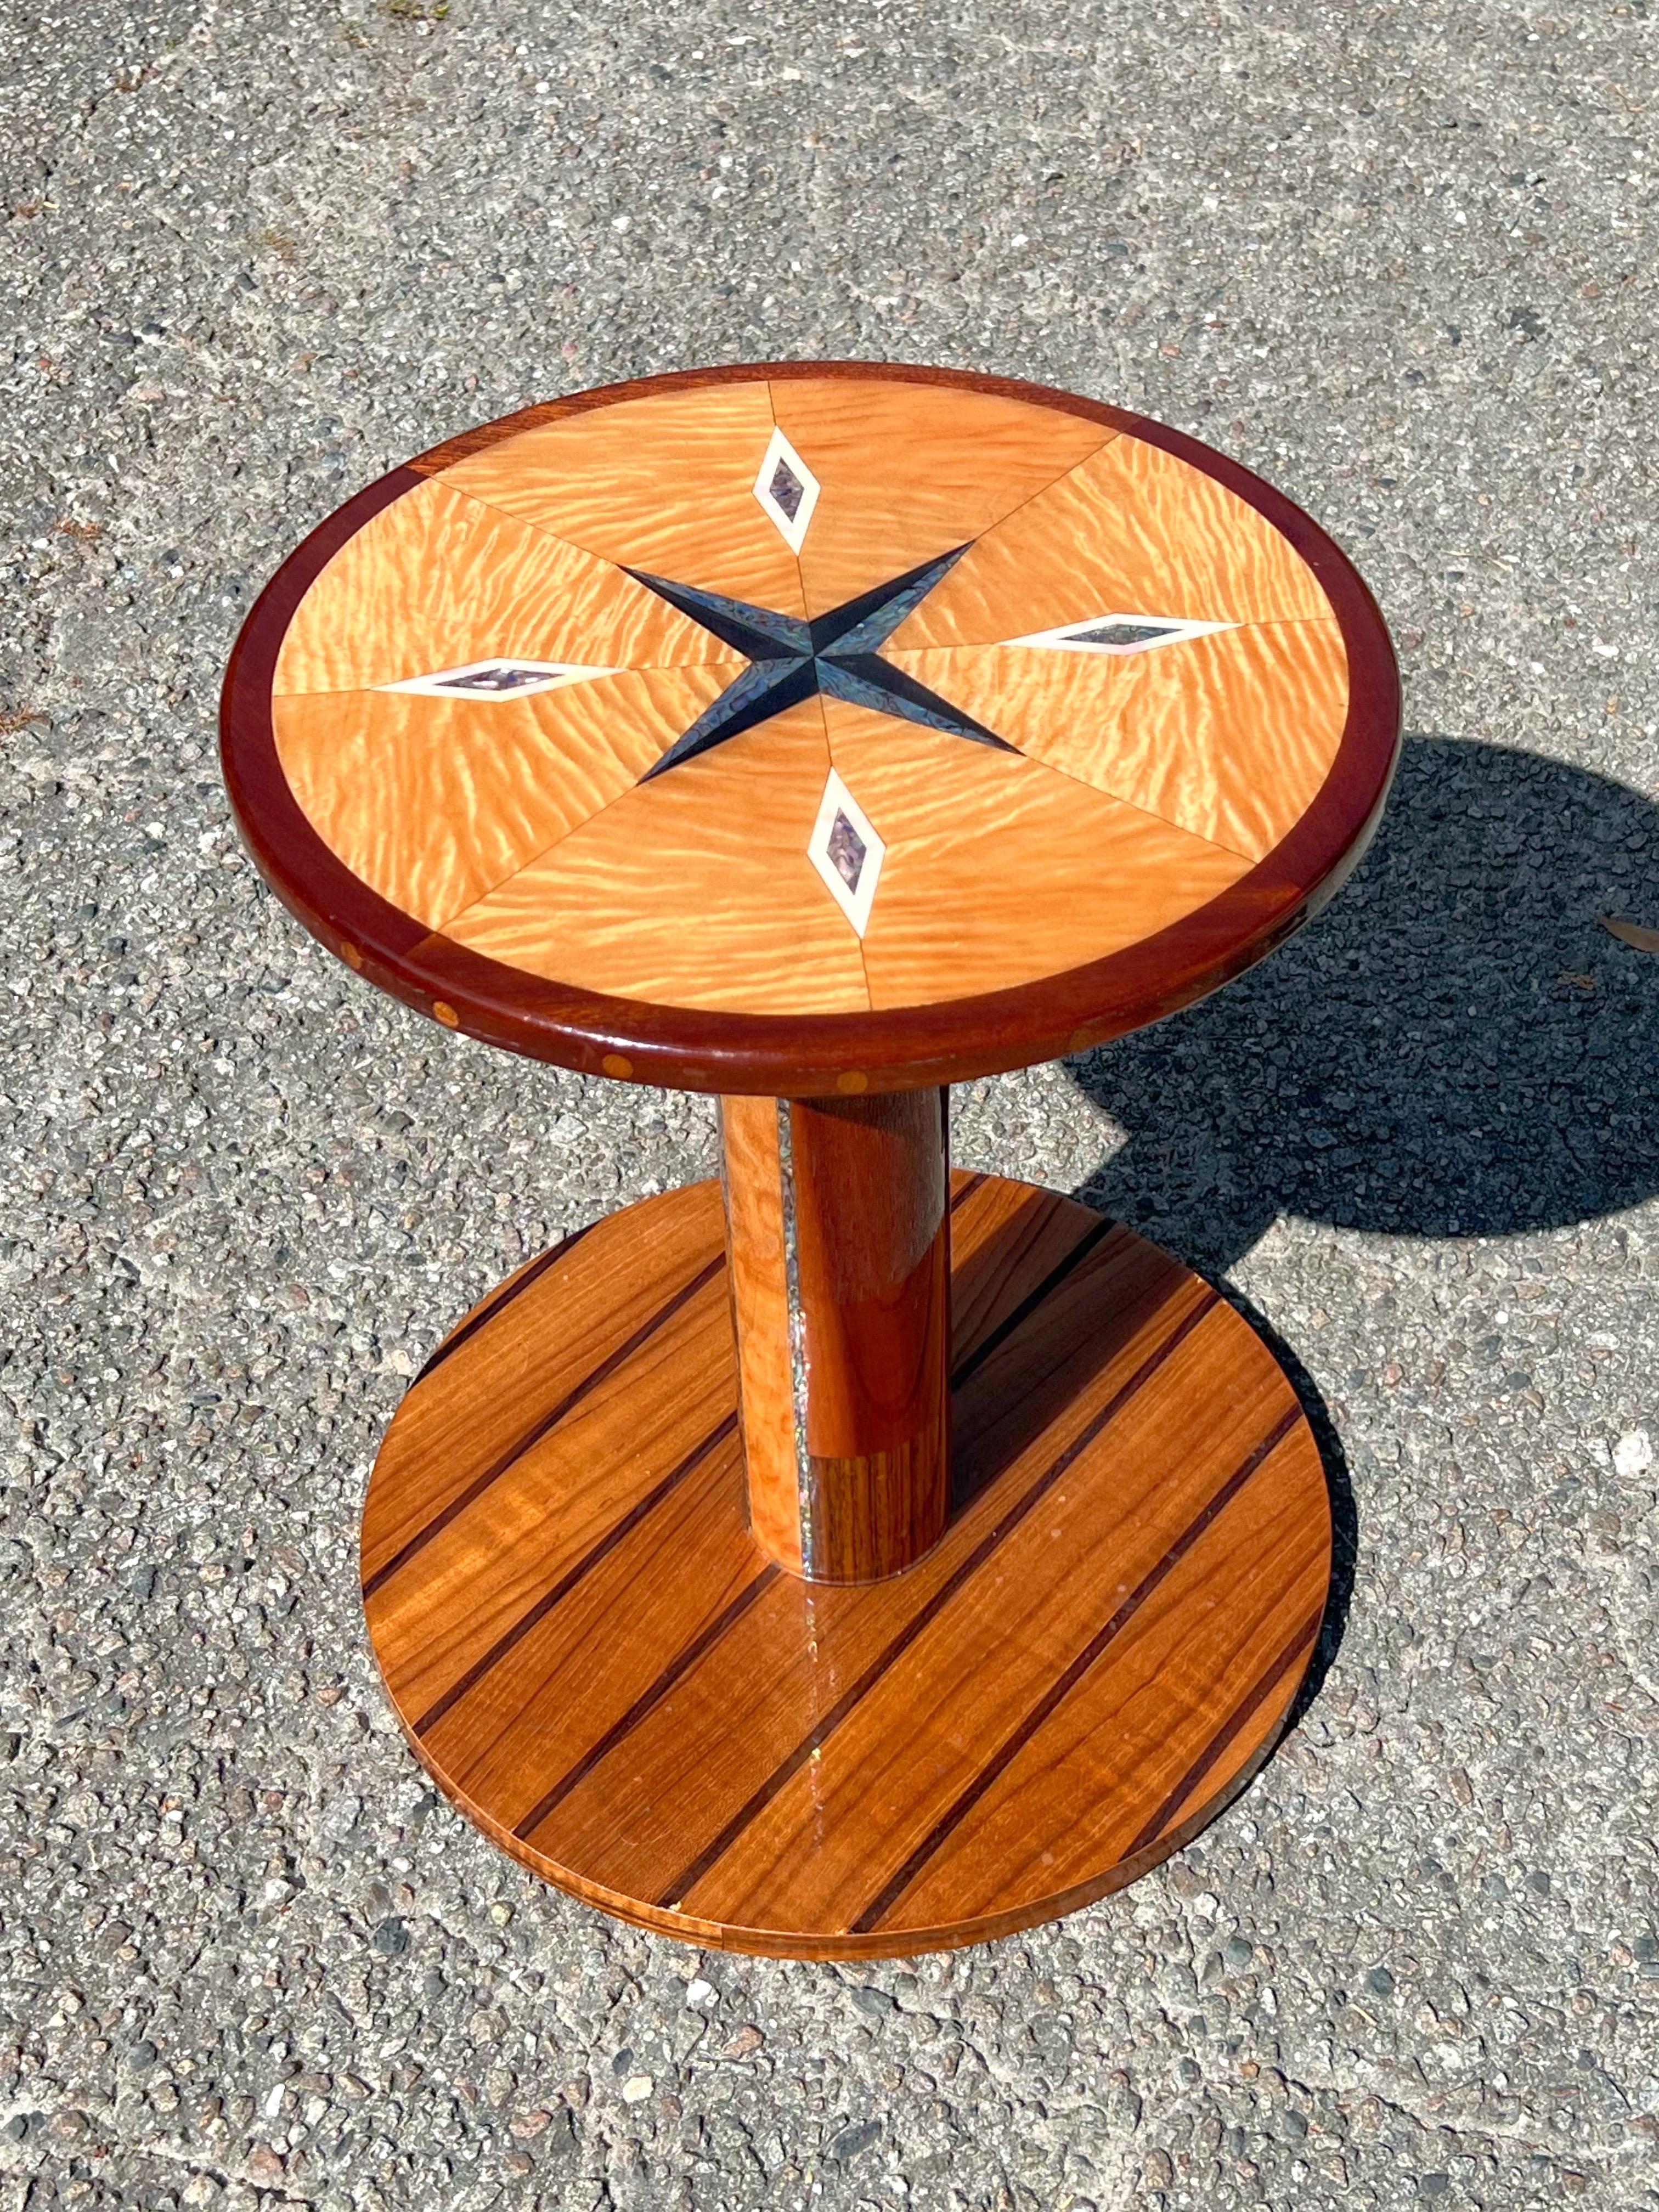 Adirondack 1970s Artisan Crafted Specimen Compass Table For Sale